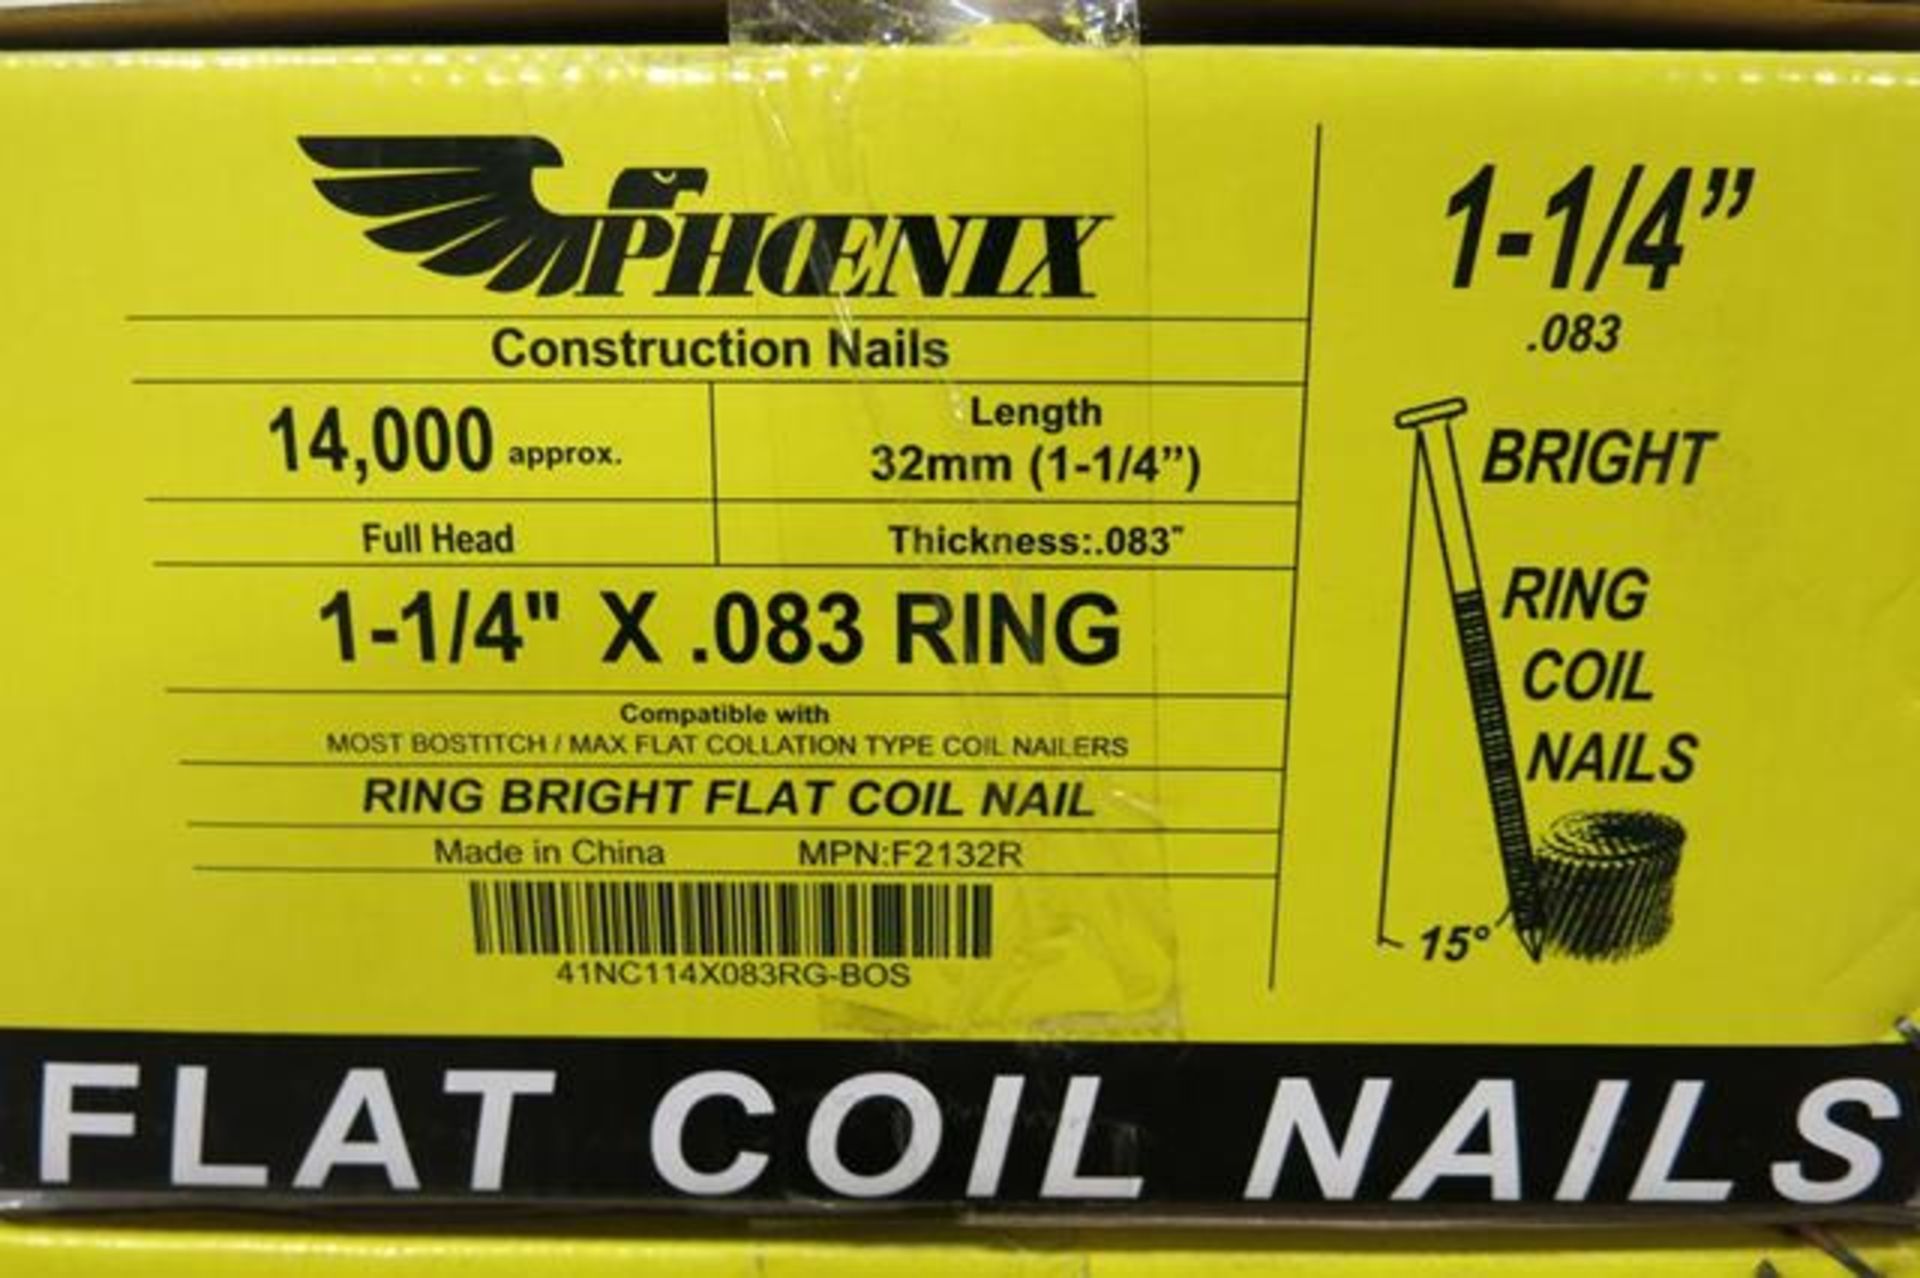 PHOENIX, 1.25" X 0.83 DIA, RING COIL NAILS, 1,400 APPROX. - NEW - Image 2 of 2